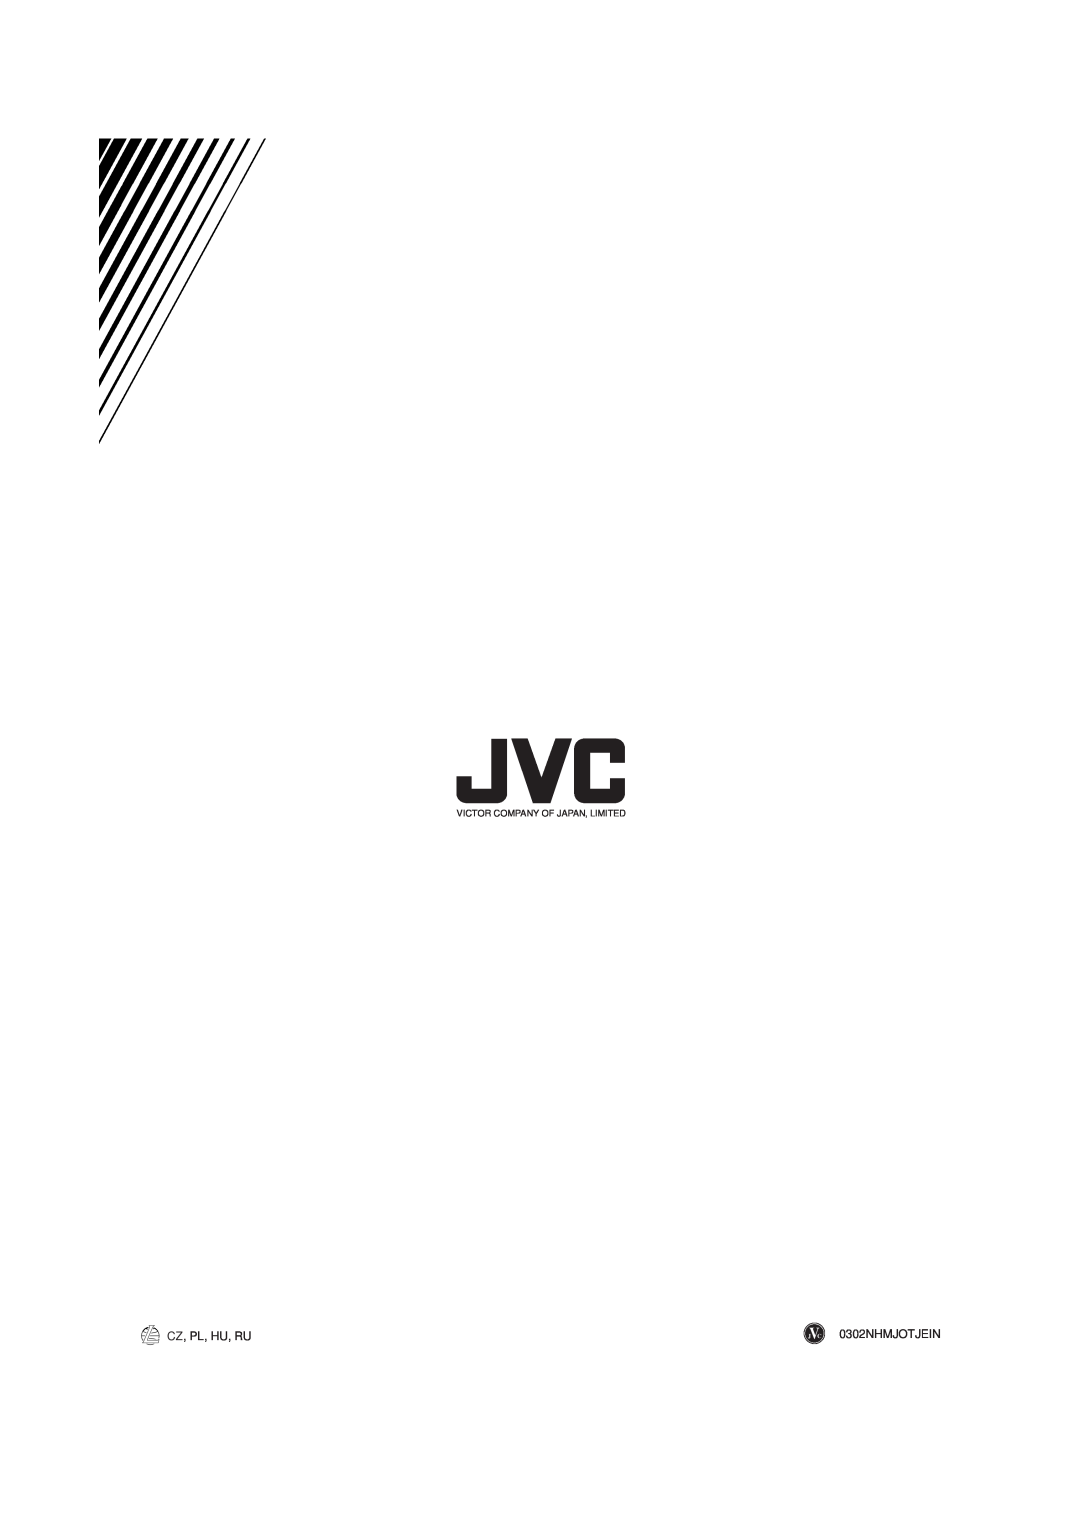 JVC RX-E112RSL, RX-E111RSL manual Cz, Pl, Hu, Ru, J C 0302NHMJOTJEIN, Victor Company Of Japan, Limited 